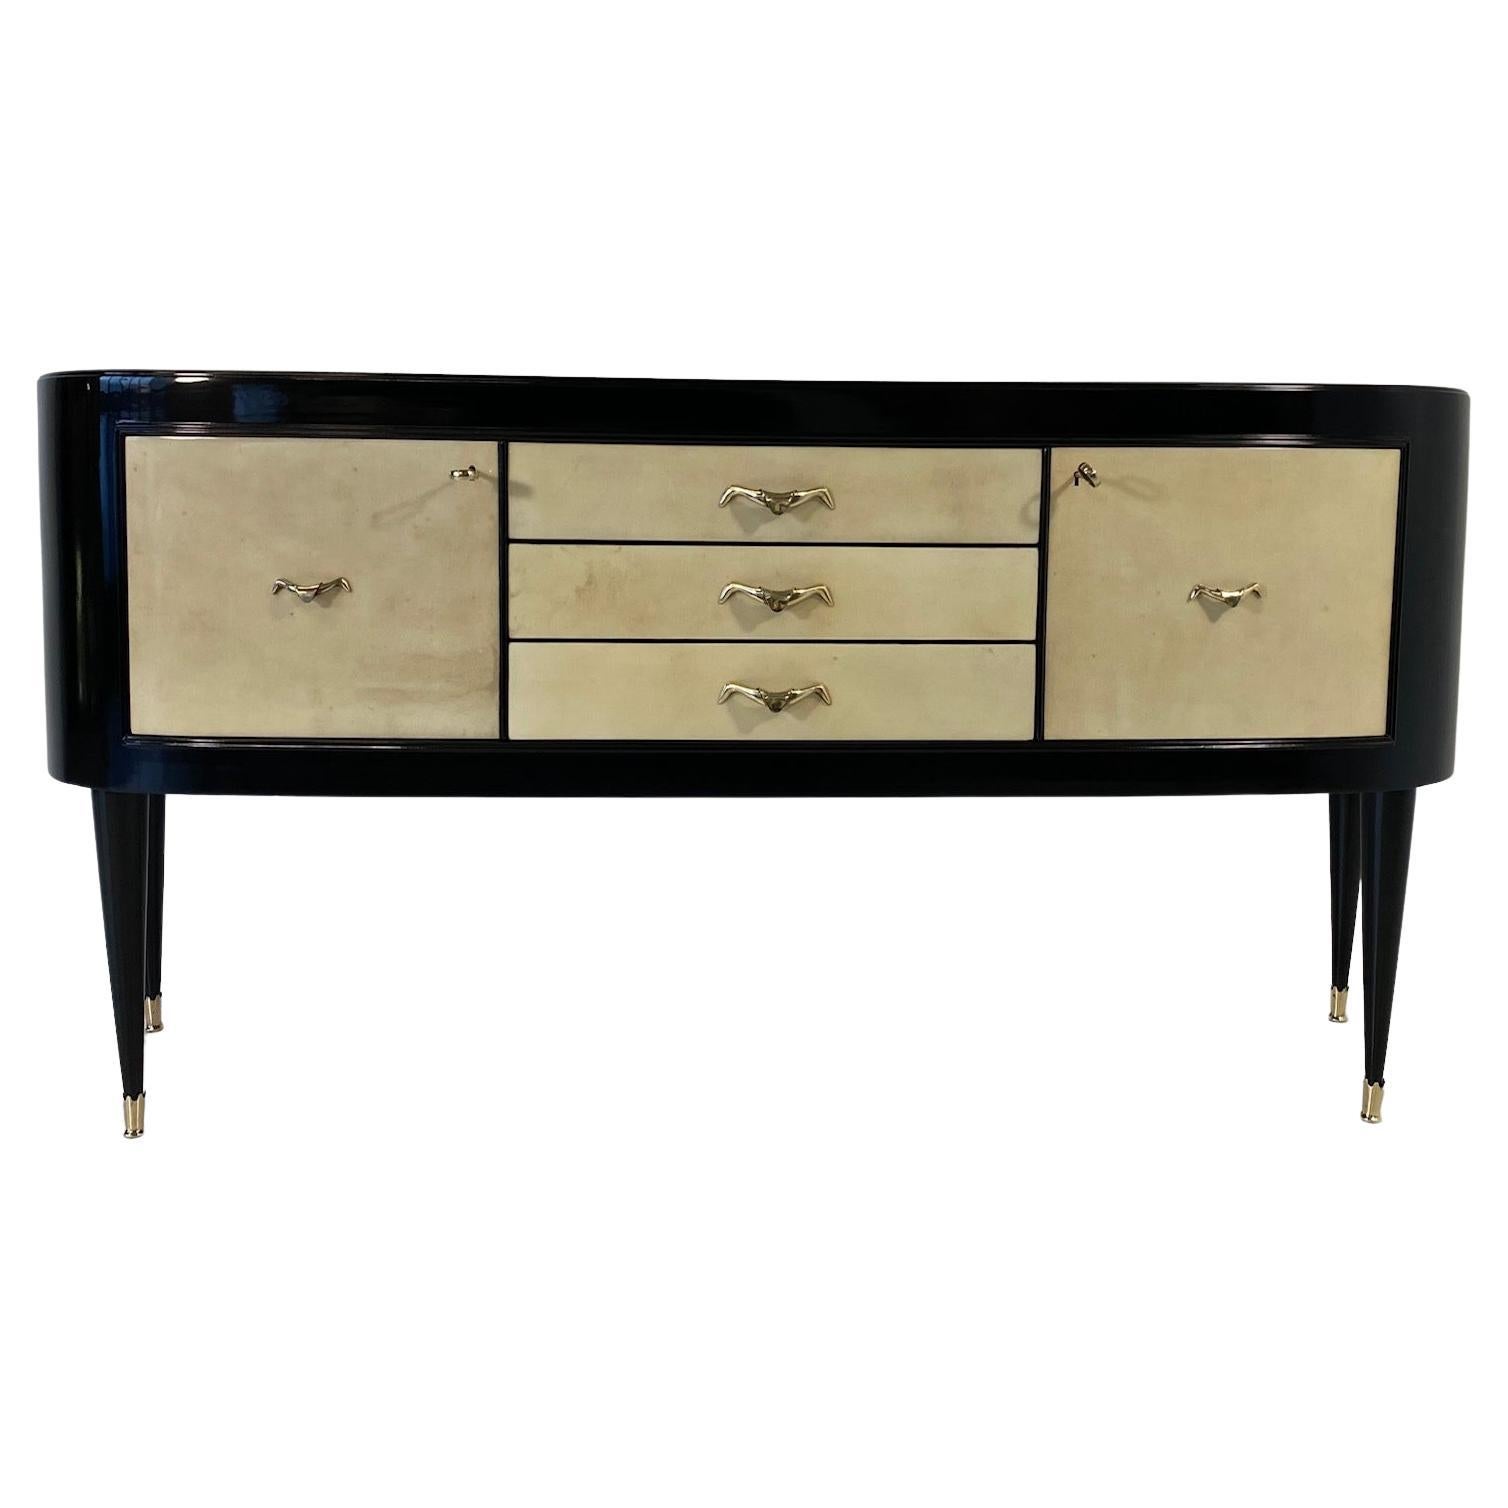 Italian Art Deco Parchment and Black Lacquer Sideboard, 1950s